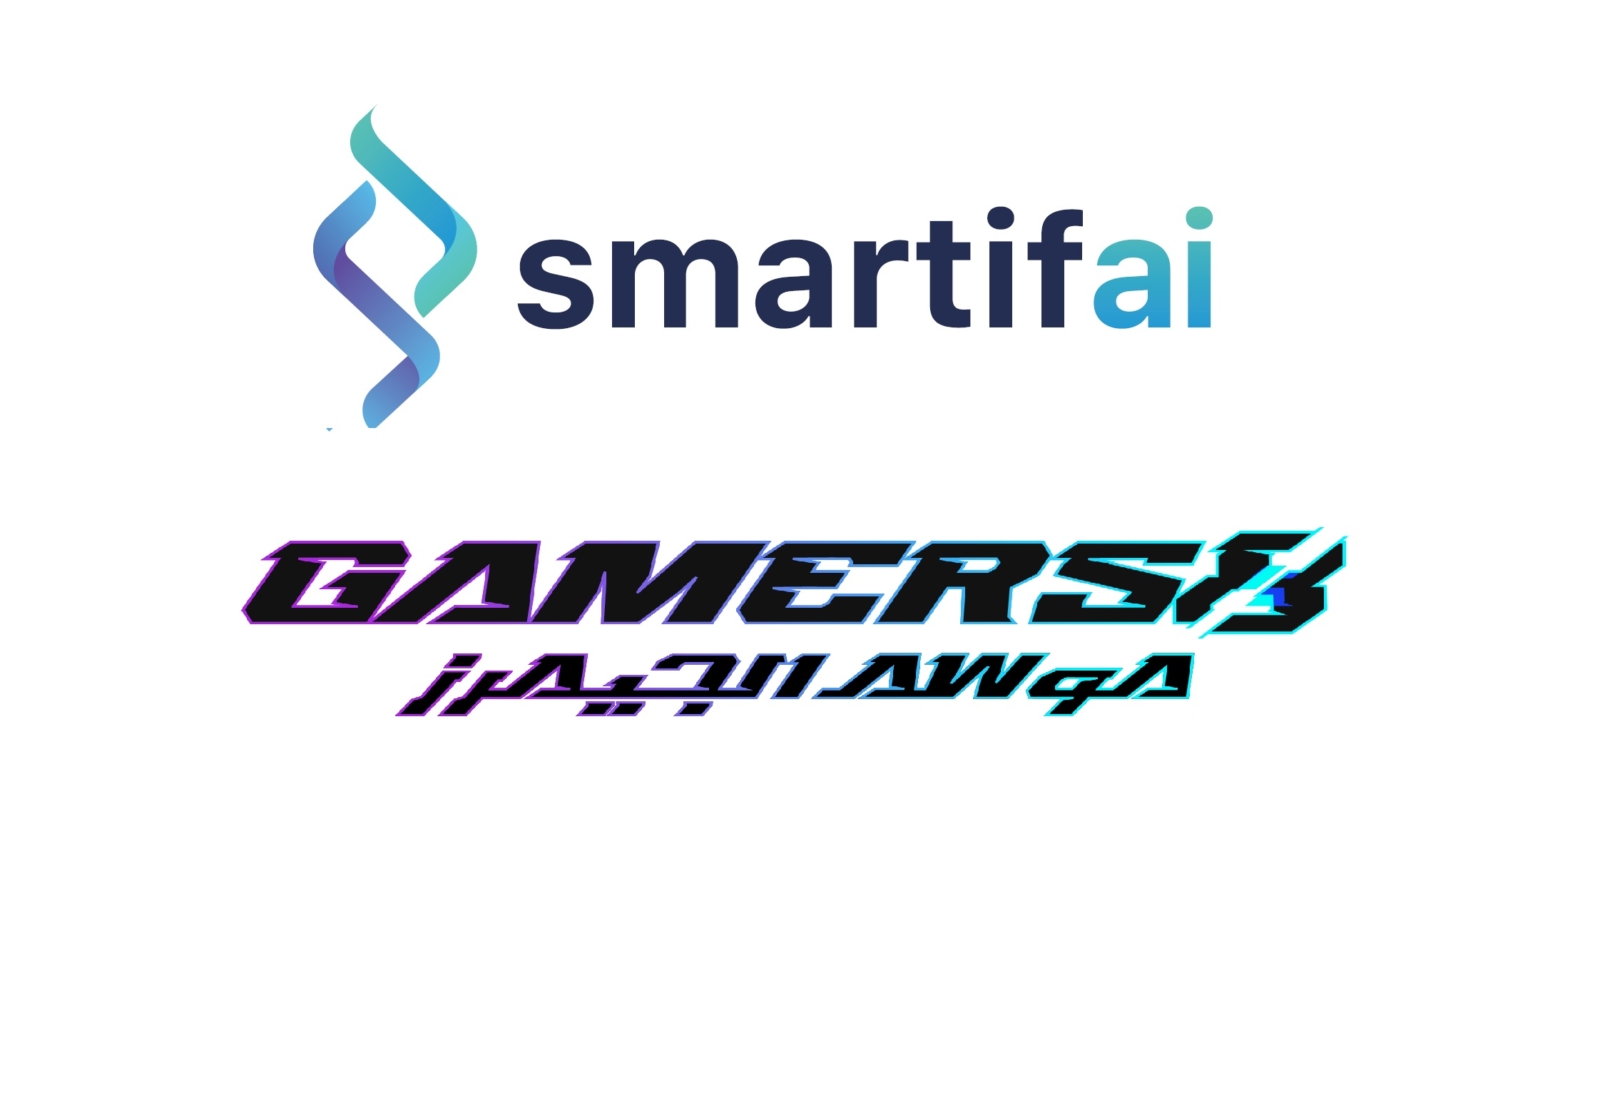 Smartifai, digital activation, google ai, Saudi esports federation, chatgpt, generative AI, Extend AdNetwork, Gamers8 2023, Gamers8 2022, KSA, UAE, Contextual targeting, business, esports, tournament, Land of heroes, benchmarks, industry standards, strategy planning, tech-driven, content centered, integration, in-screen ads, in-image ads, advertising, advertisements, global, campaign, regional markets, chatgpt ads, ad interactions, display ads, social ads, addressable context, gen Z, generation alpha, CTA, call to action, audience sentiment, Saudi Arabia, real-time, motion context, hyper personalization, footfall, marketing, branding, gaming innovation,